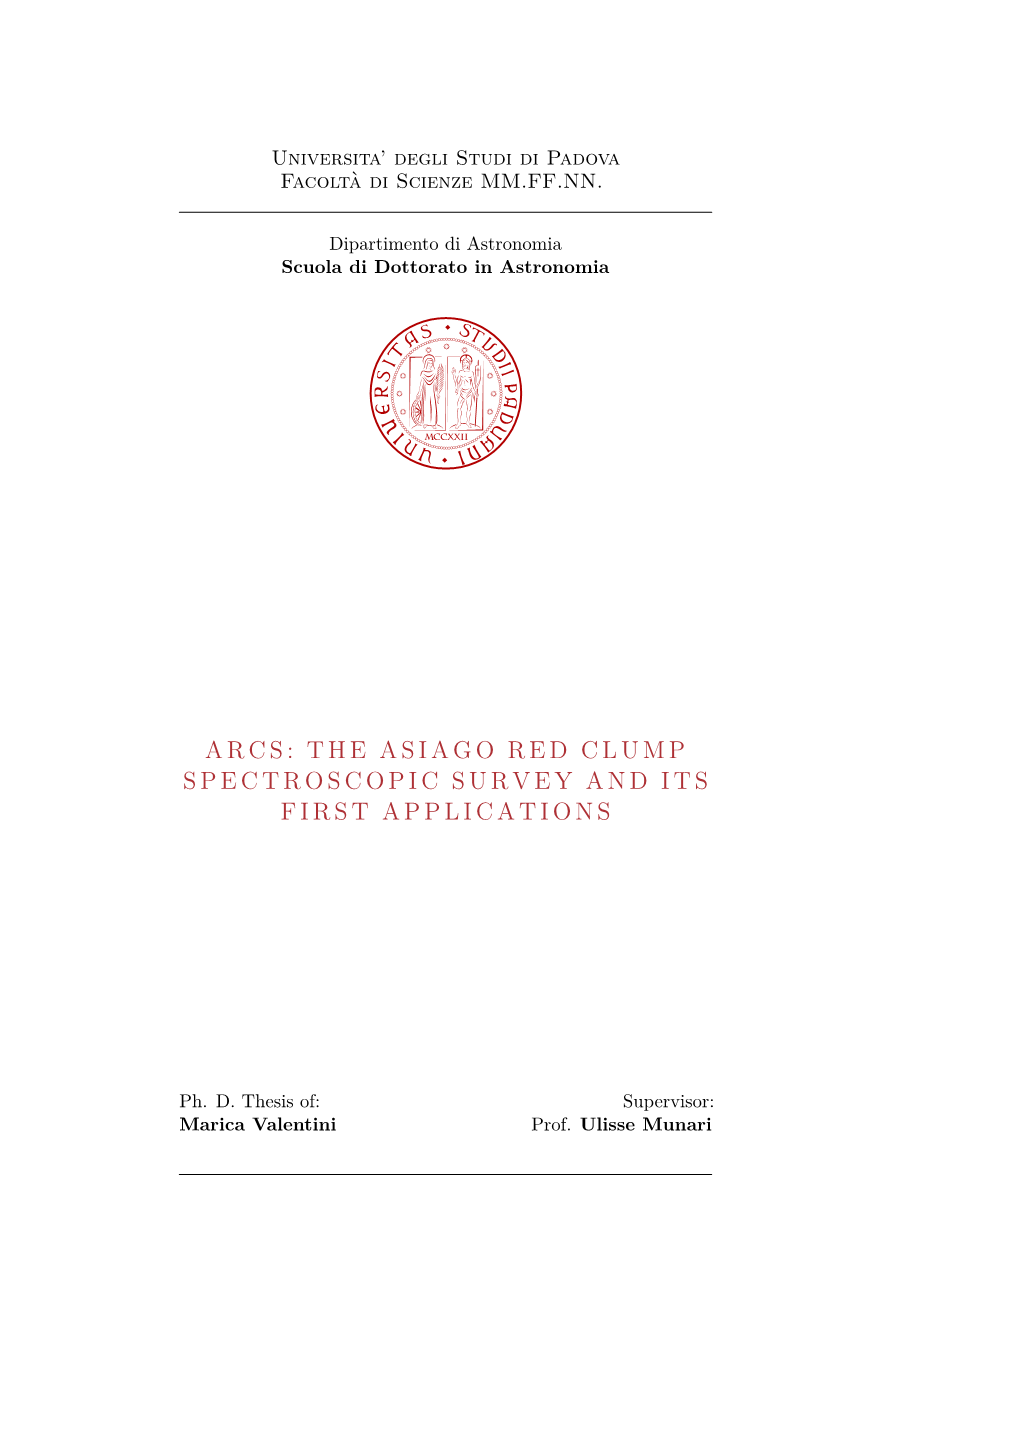 The Asiago Red Clump Spectroscopic Survey and Its First Applications